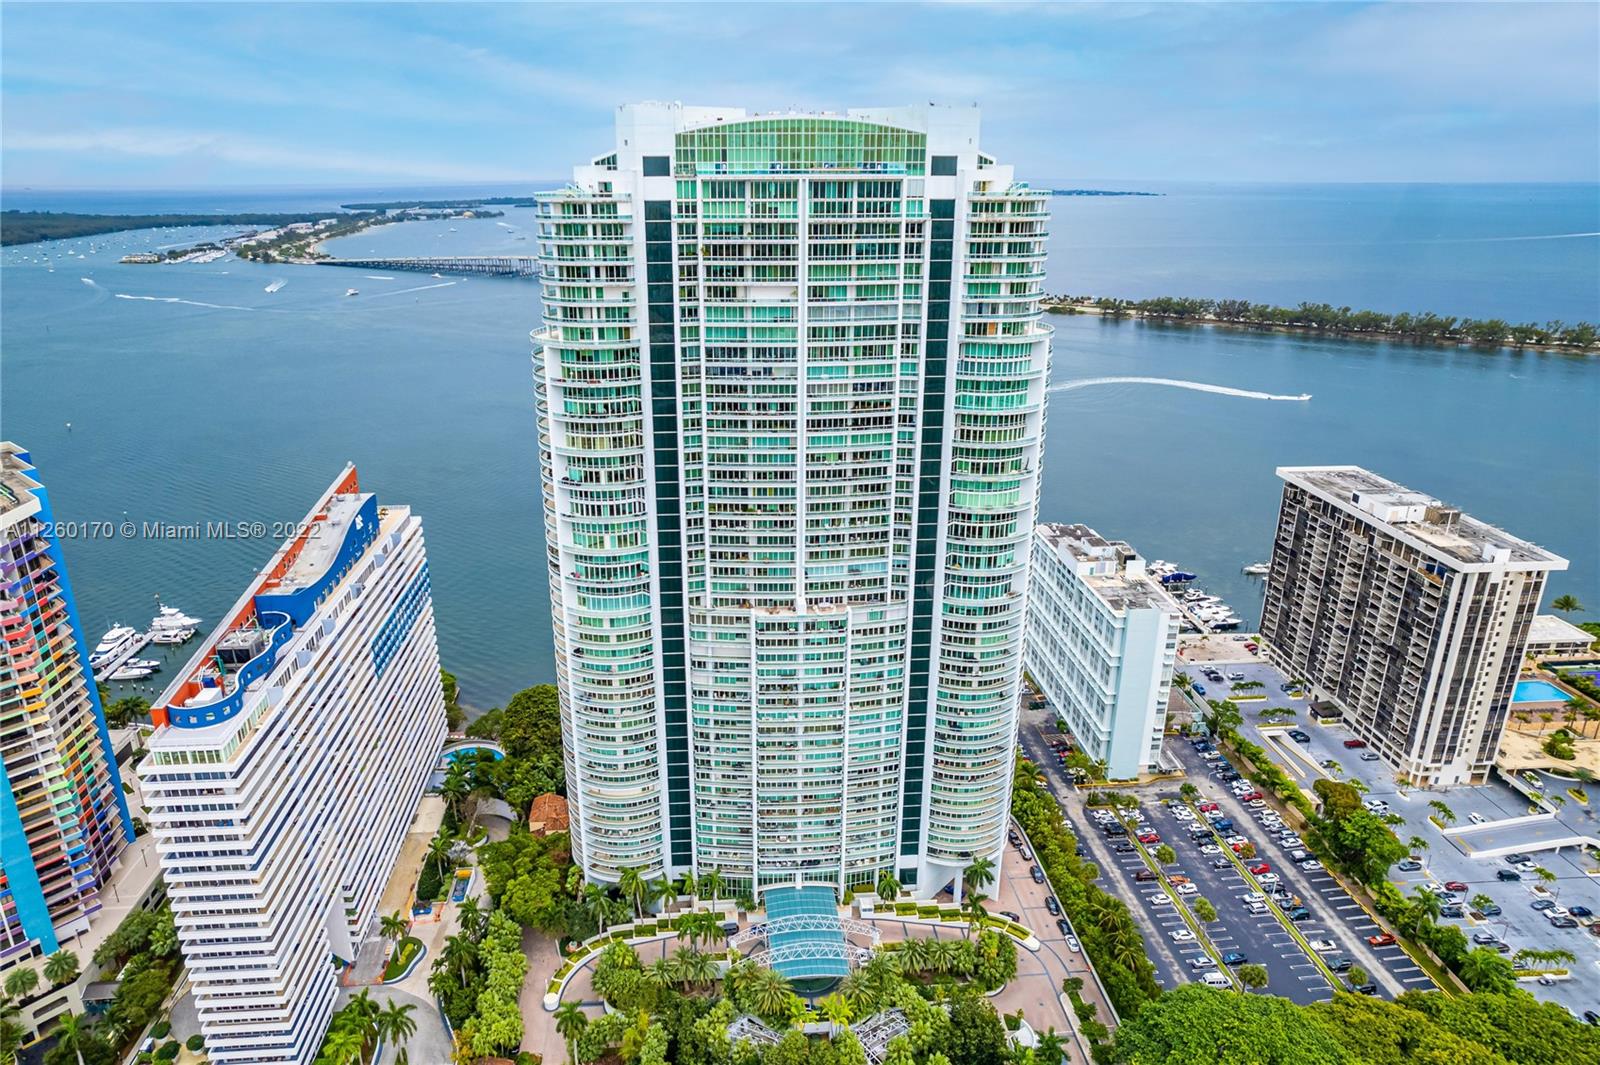 Beautiful 2 bedroom 2.5 bath , at prestigious Santa Maria ICONIC BUILDING ON BRICKELL AVE. Marble floors throughout with wood floors in bedrooms. Unit comes with 1 parking space, laundry room, seperate service entrance through rear, private foyer, private elevator, and much more. The iconic Santa Maria on Brickell first-class 51 story synonymous of elegance, sophistication, exclusivity & privacy. Enjoy luxury amenities as part of living in Santa Maria such as waterfront pool, marina, business center, tennis courts, club house, private gym in the 51th floor, and café restaurant in lobby.